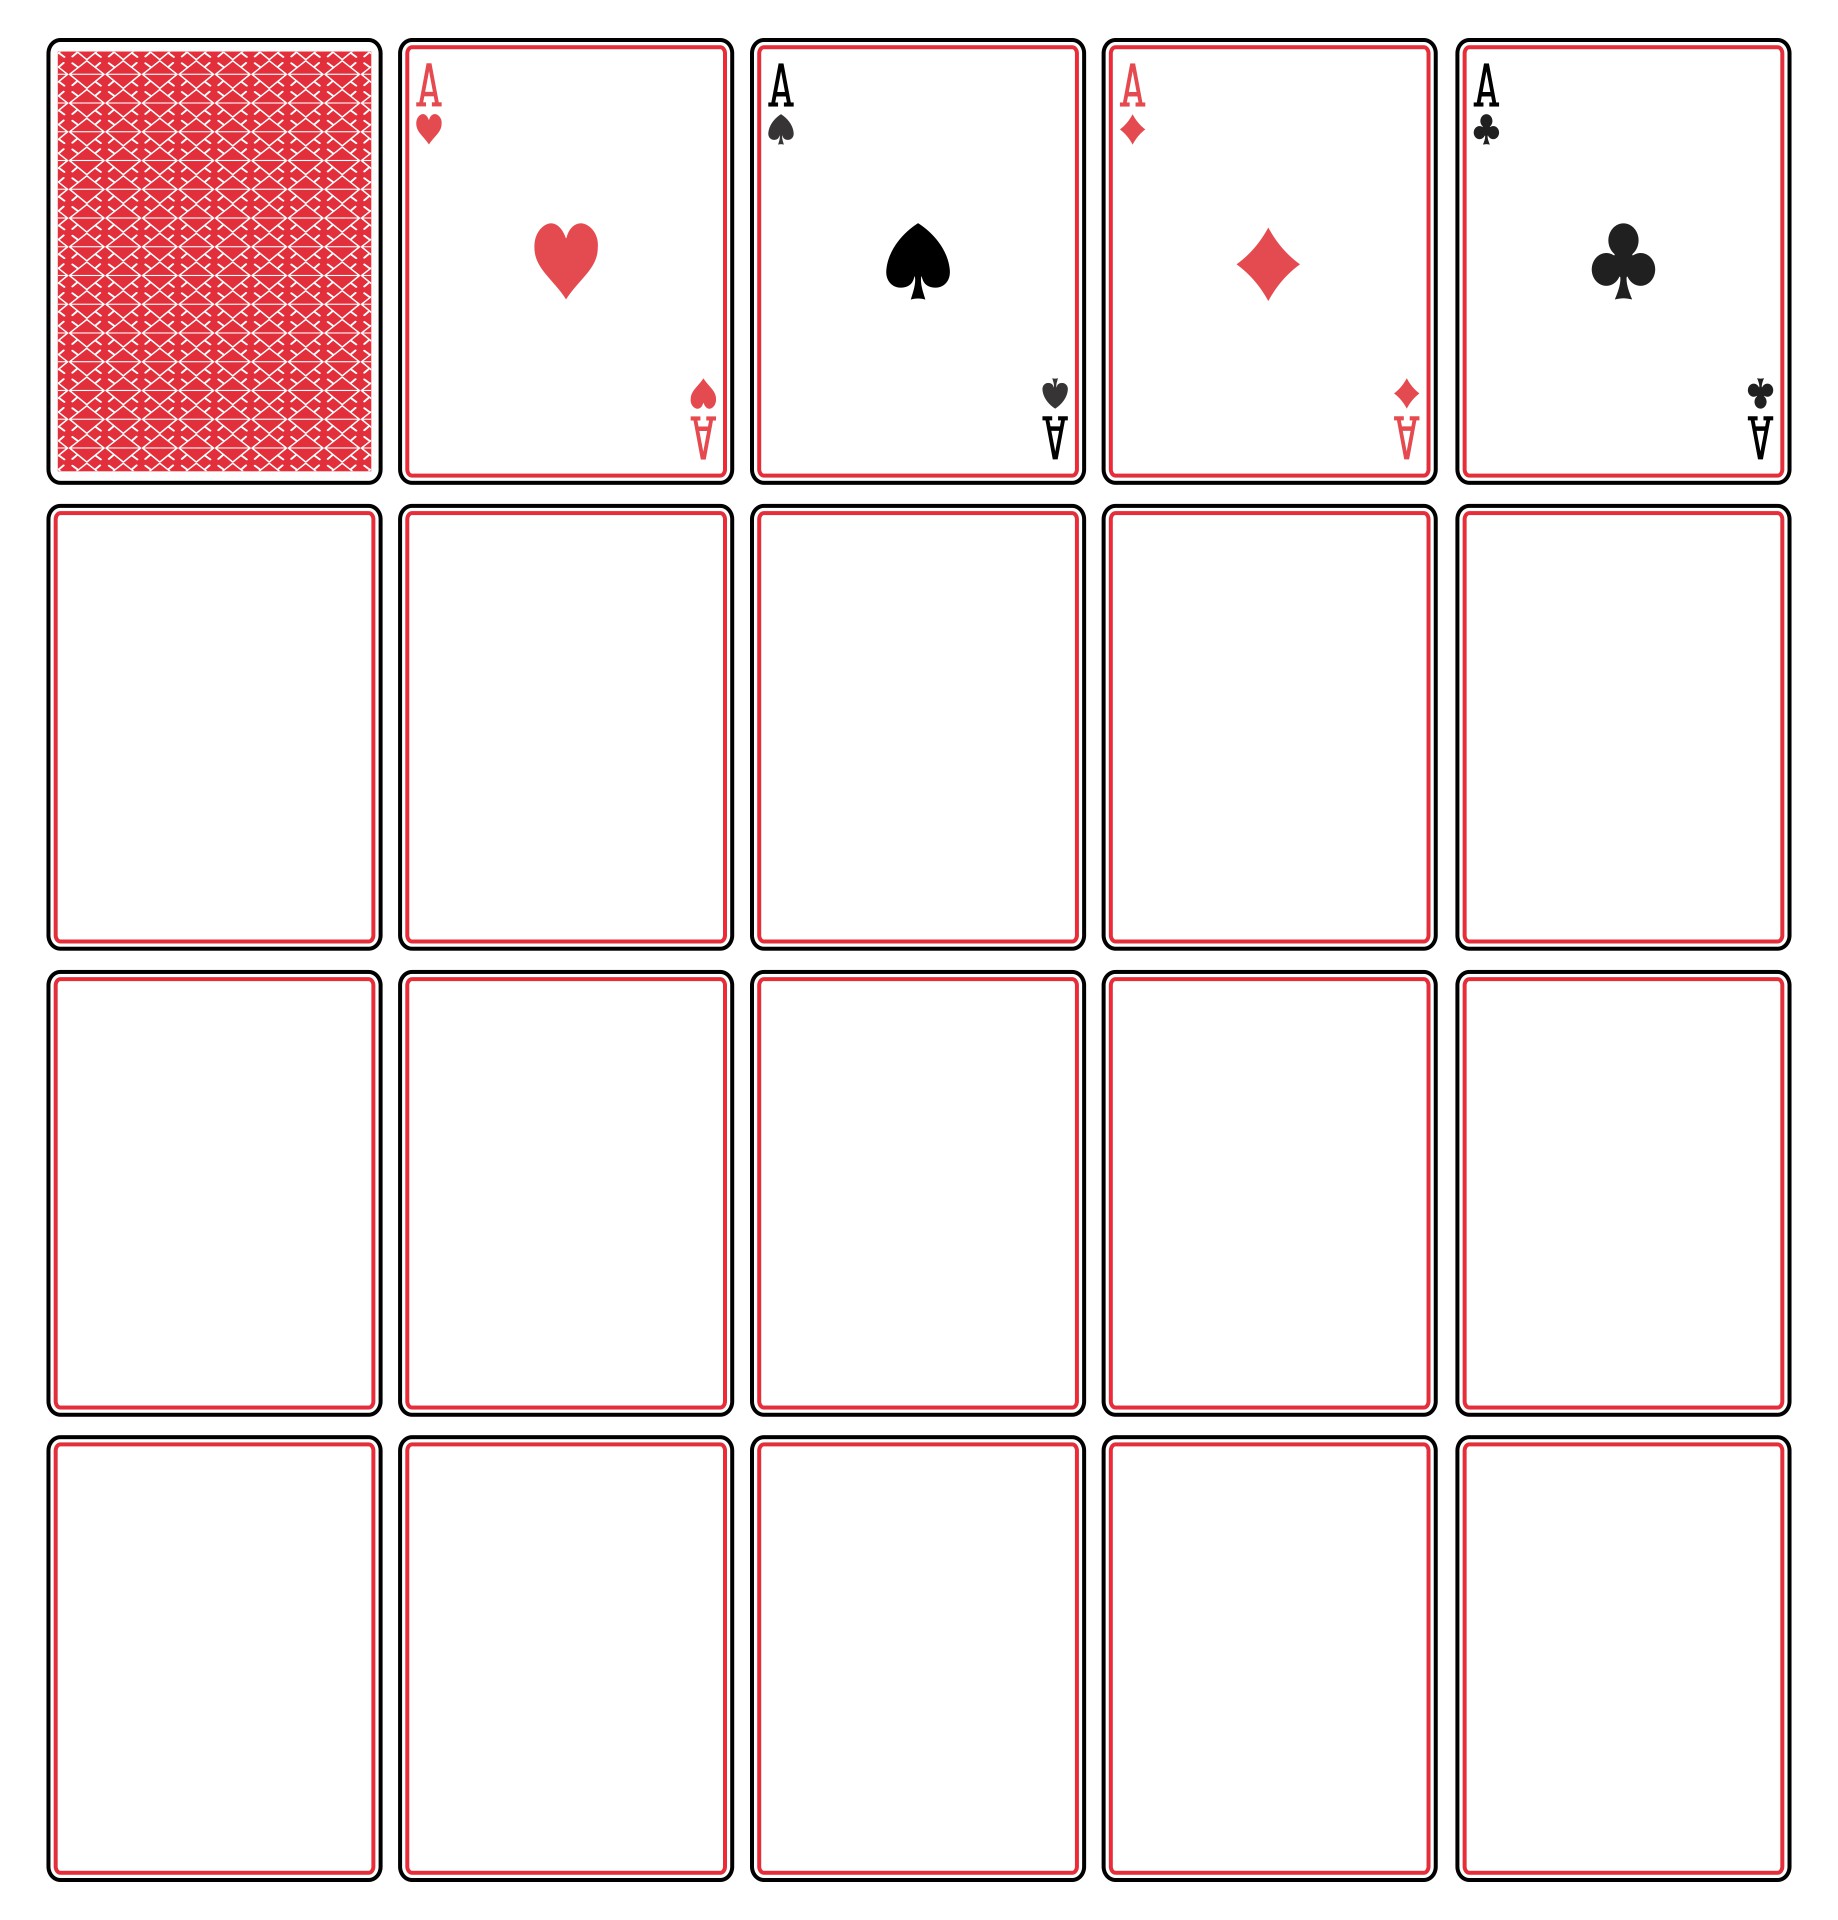 Playing Card Template Word - Great Professional Template Design  Blank  playing cards, Printable playing cards, Custom playing cards